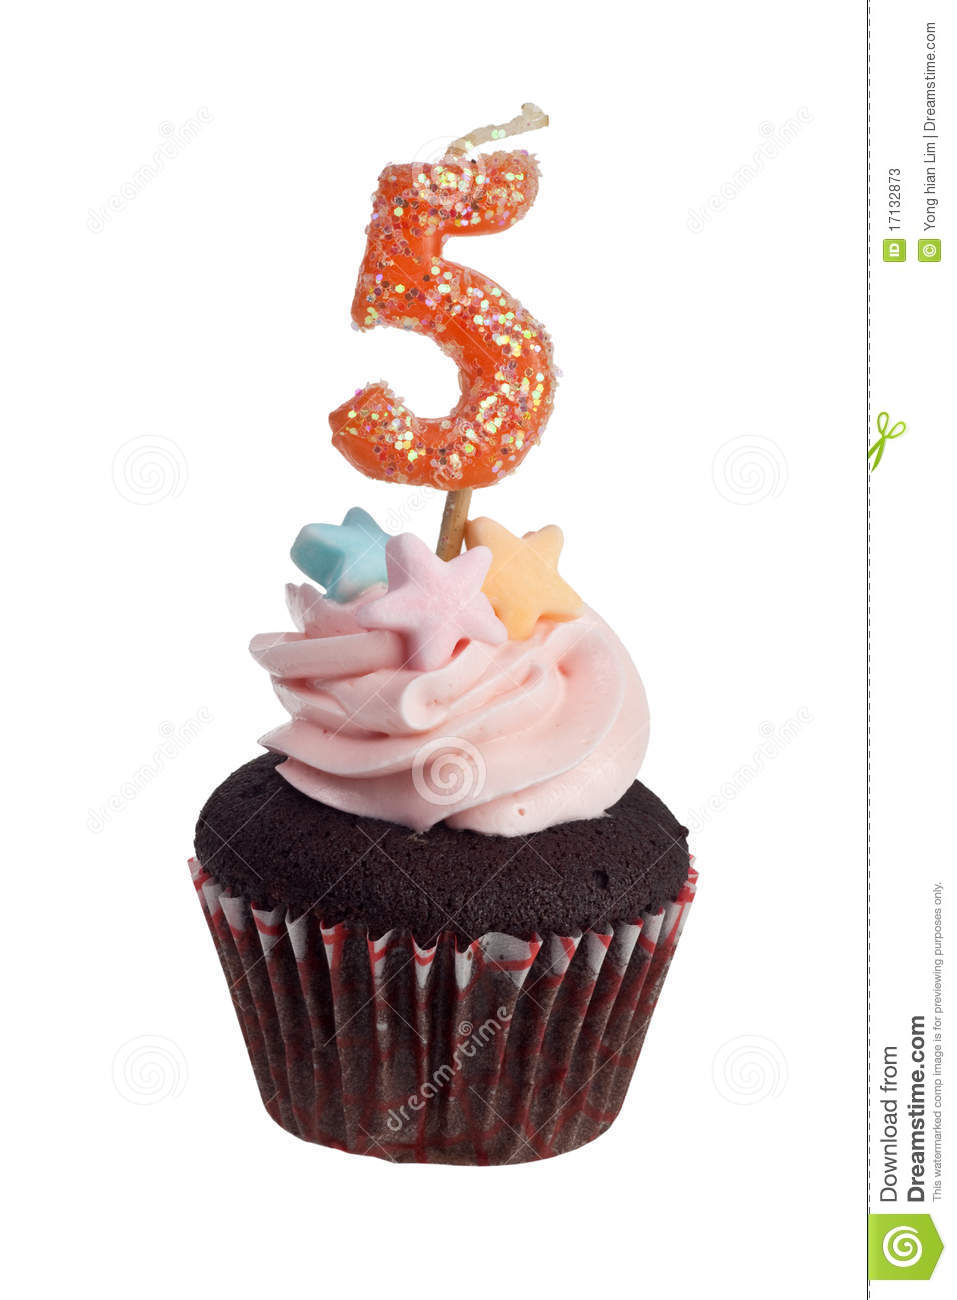 Mini Cupcake With Birthday Candle For Five Year Old Isolated On White    